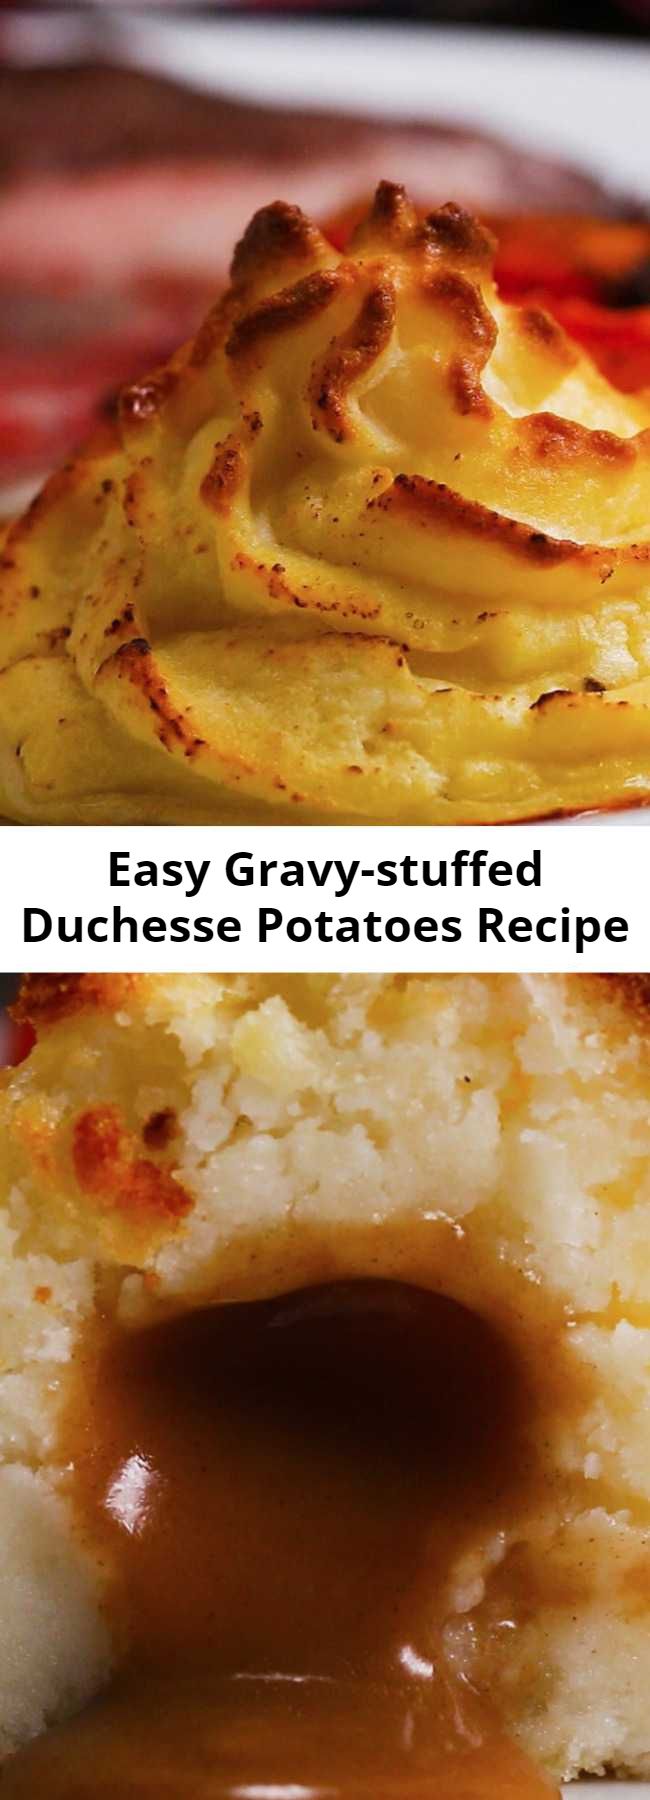 Easy Gravy-stuffed Duchesse Potatoes Recipe - Classic Duchess potatoes, mashed with butter, nutmeg and cream, then baked until the tops are golden brown.